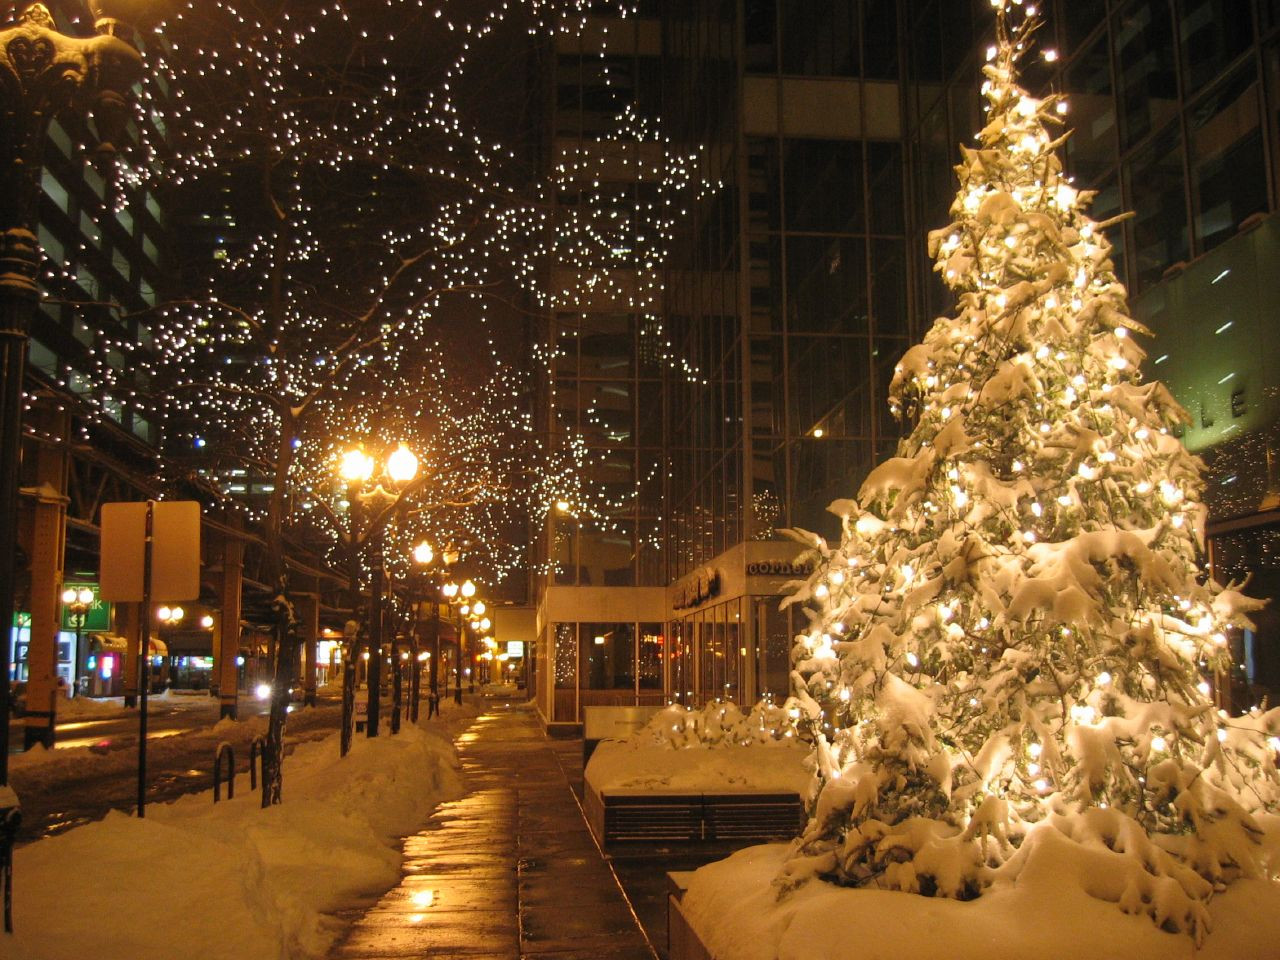 Pool City Christmas Trees
 The 10 Most Festive Destinations To Celebrate Christmas In